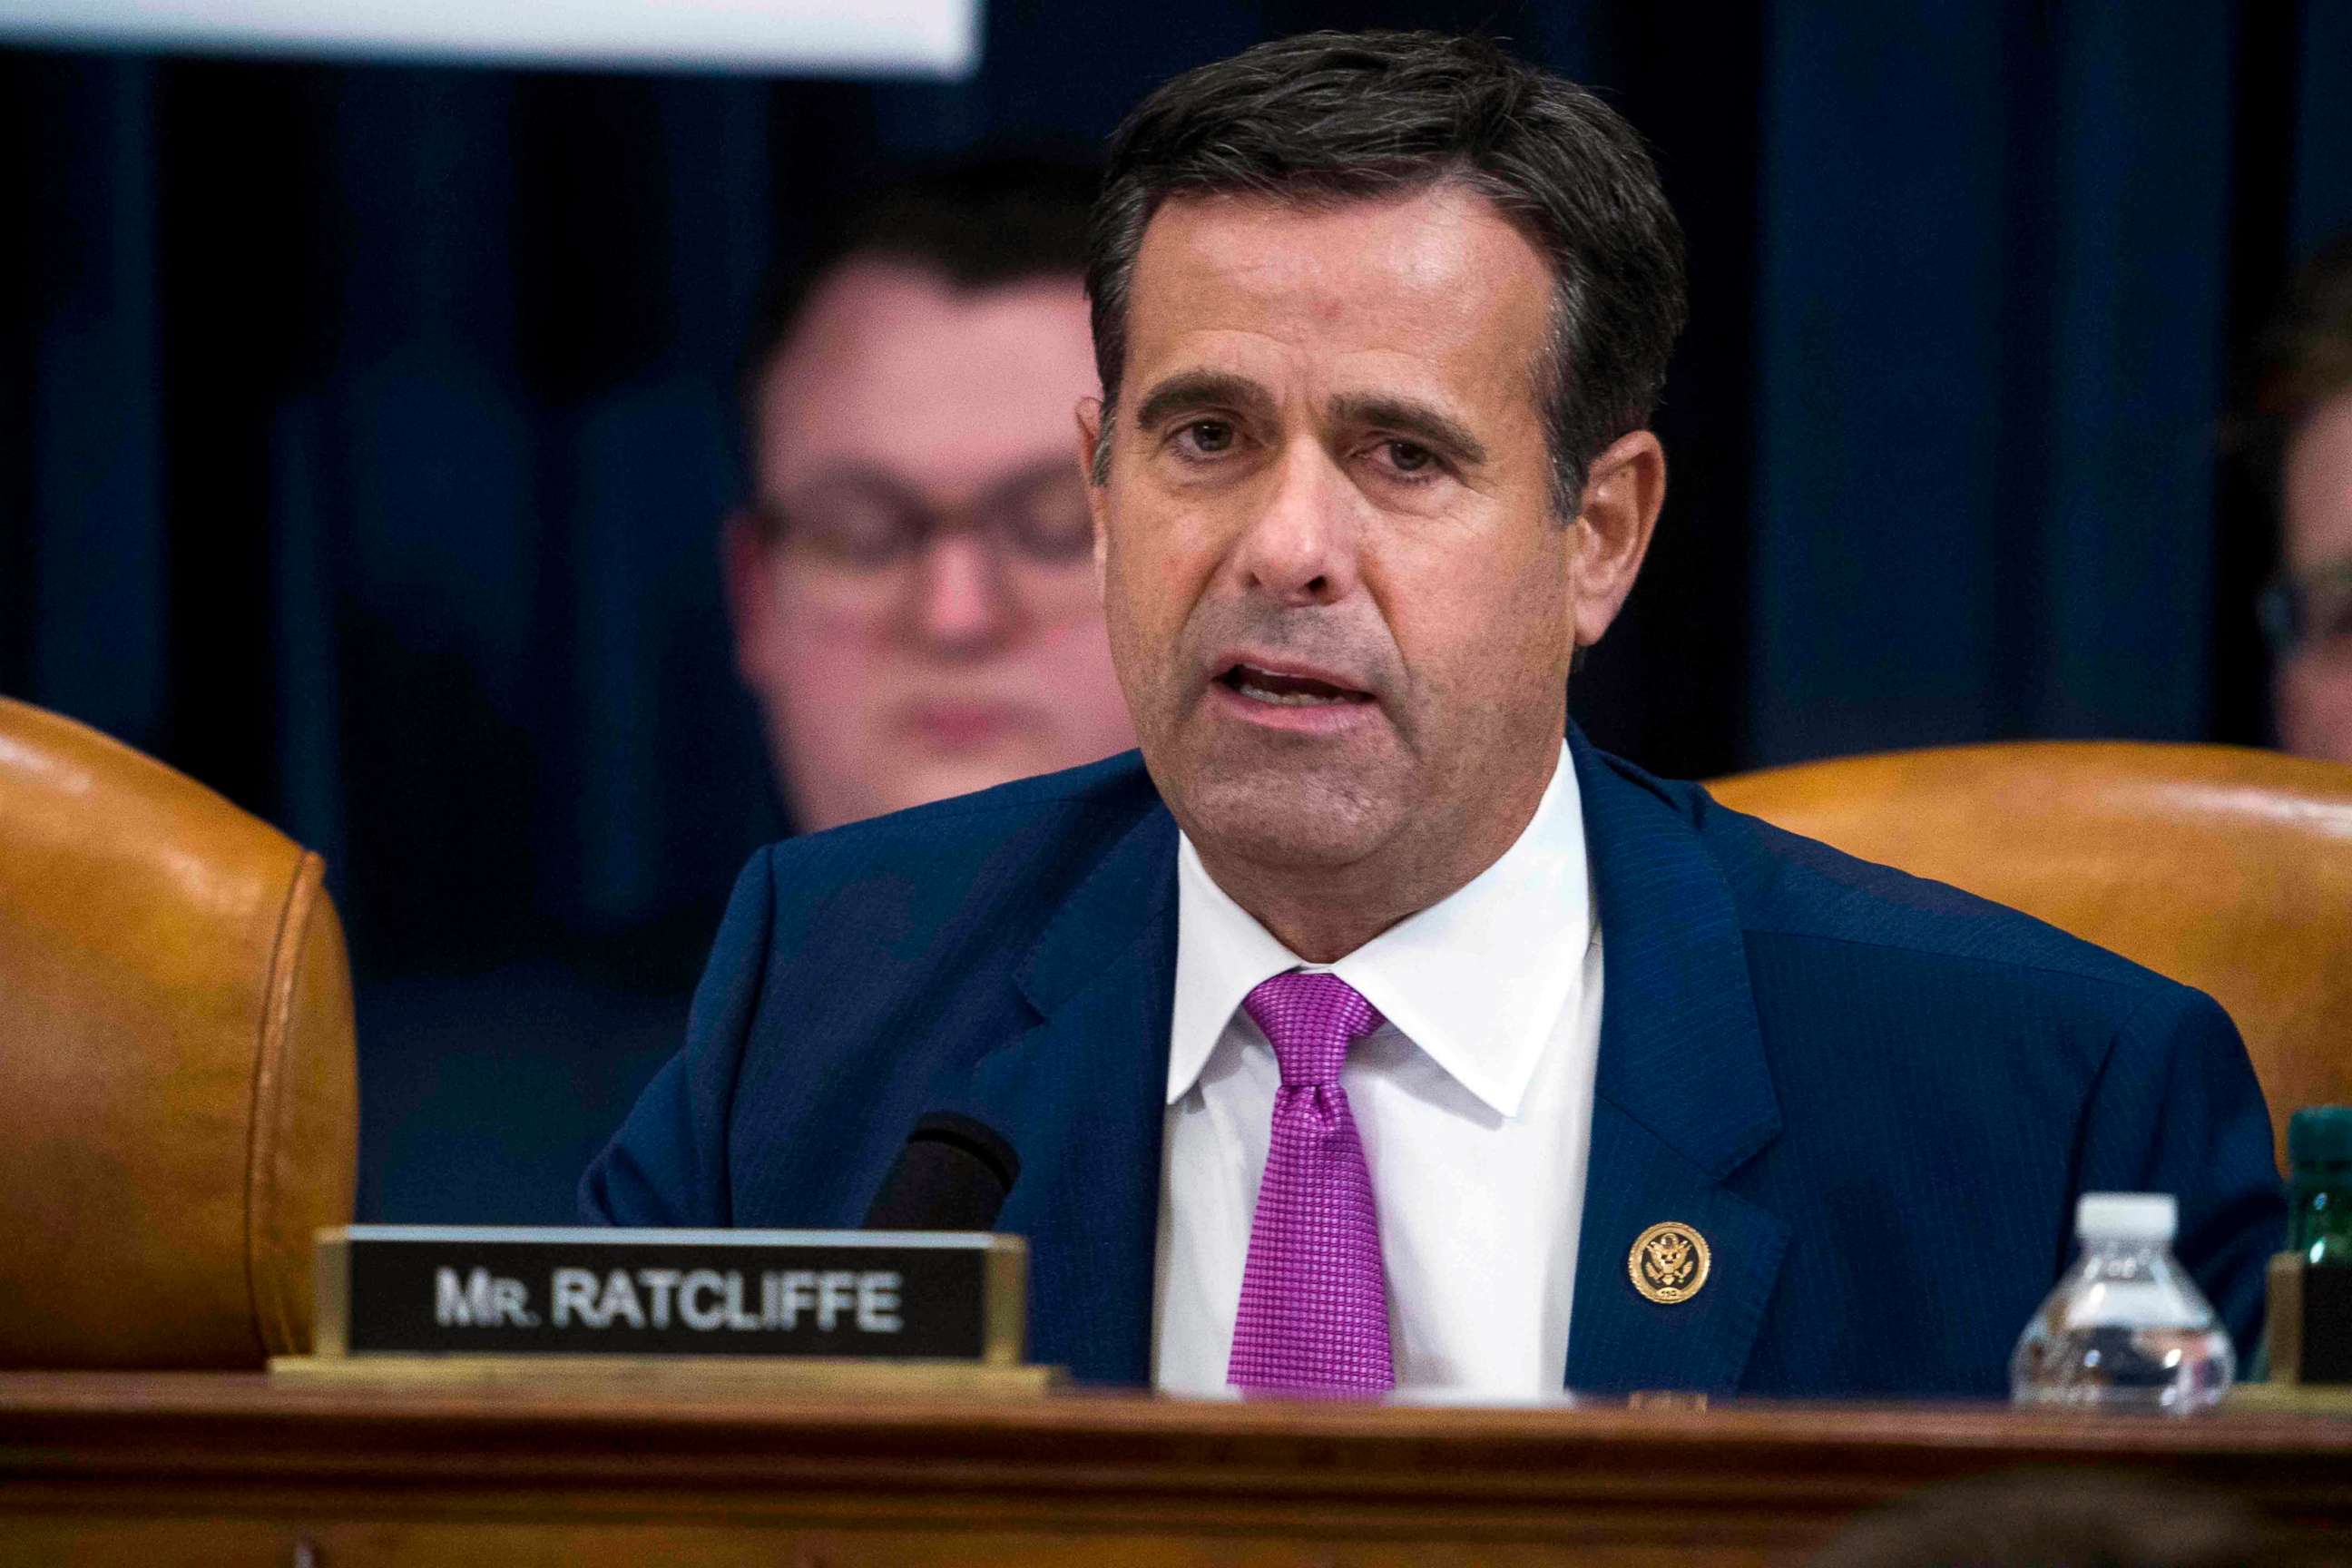 PHOTO: In this Dec. 9, 2019, file photo, Rep. John Ratcliffe is shown during the House impeachment inquiry hearings in Washington.